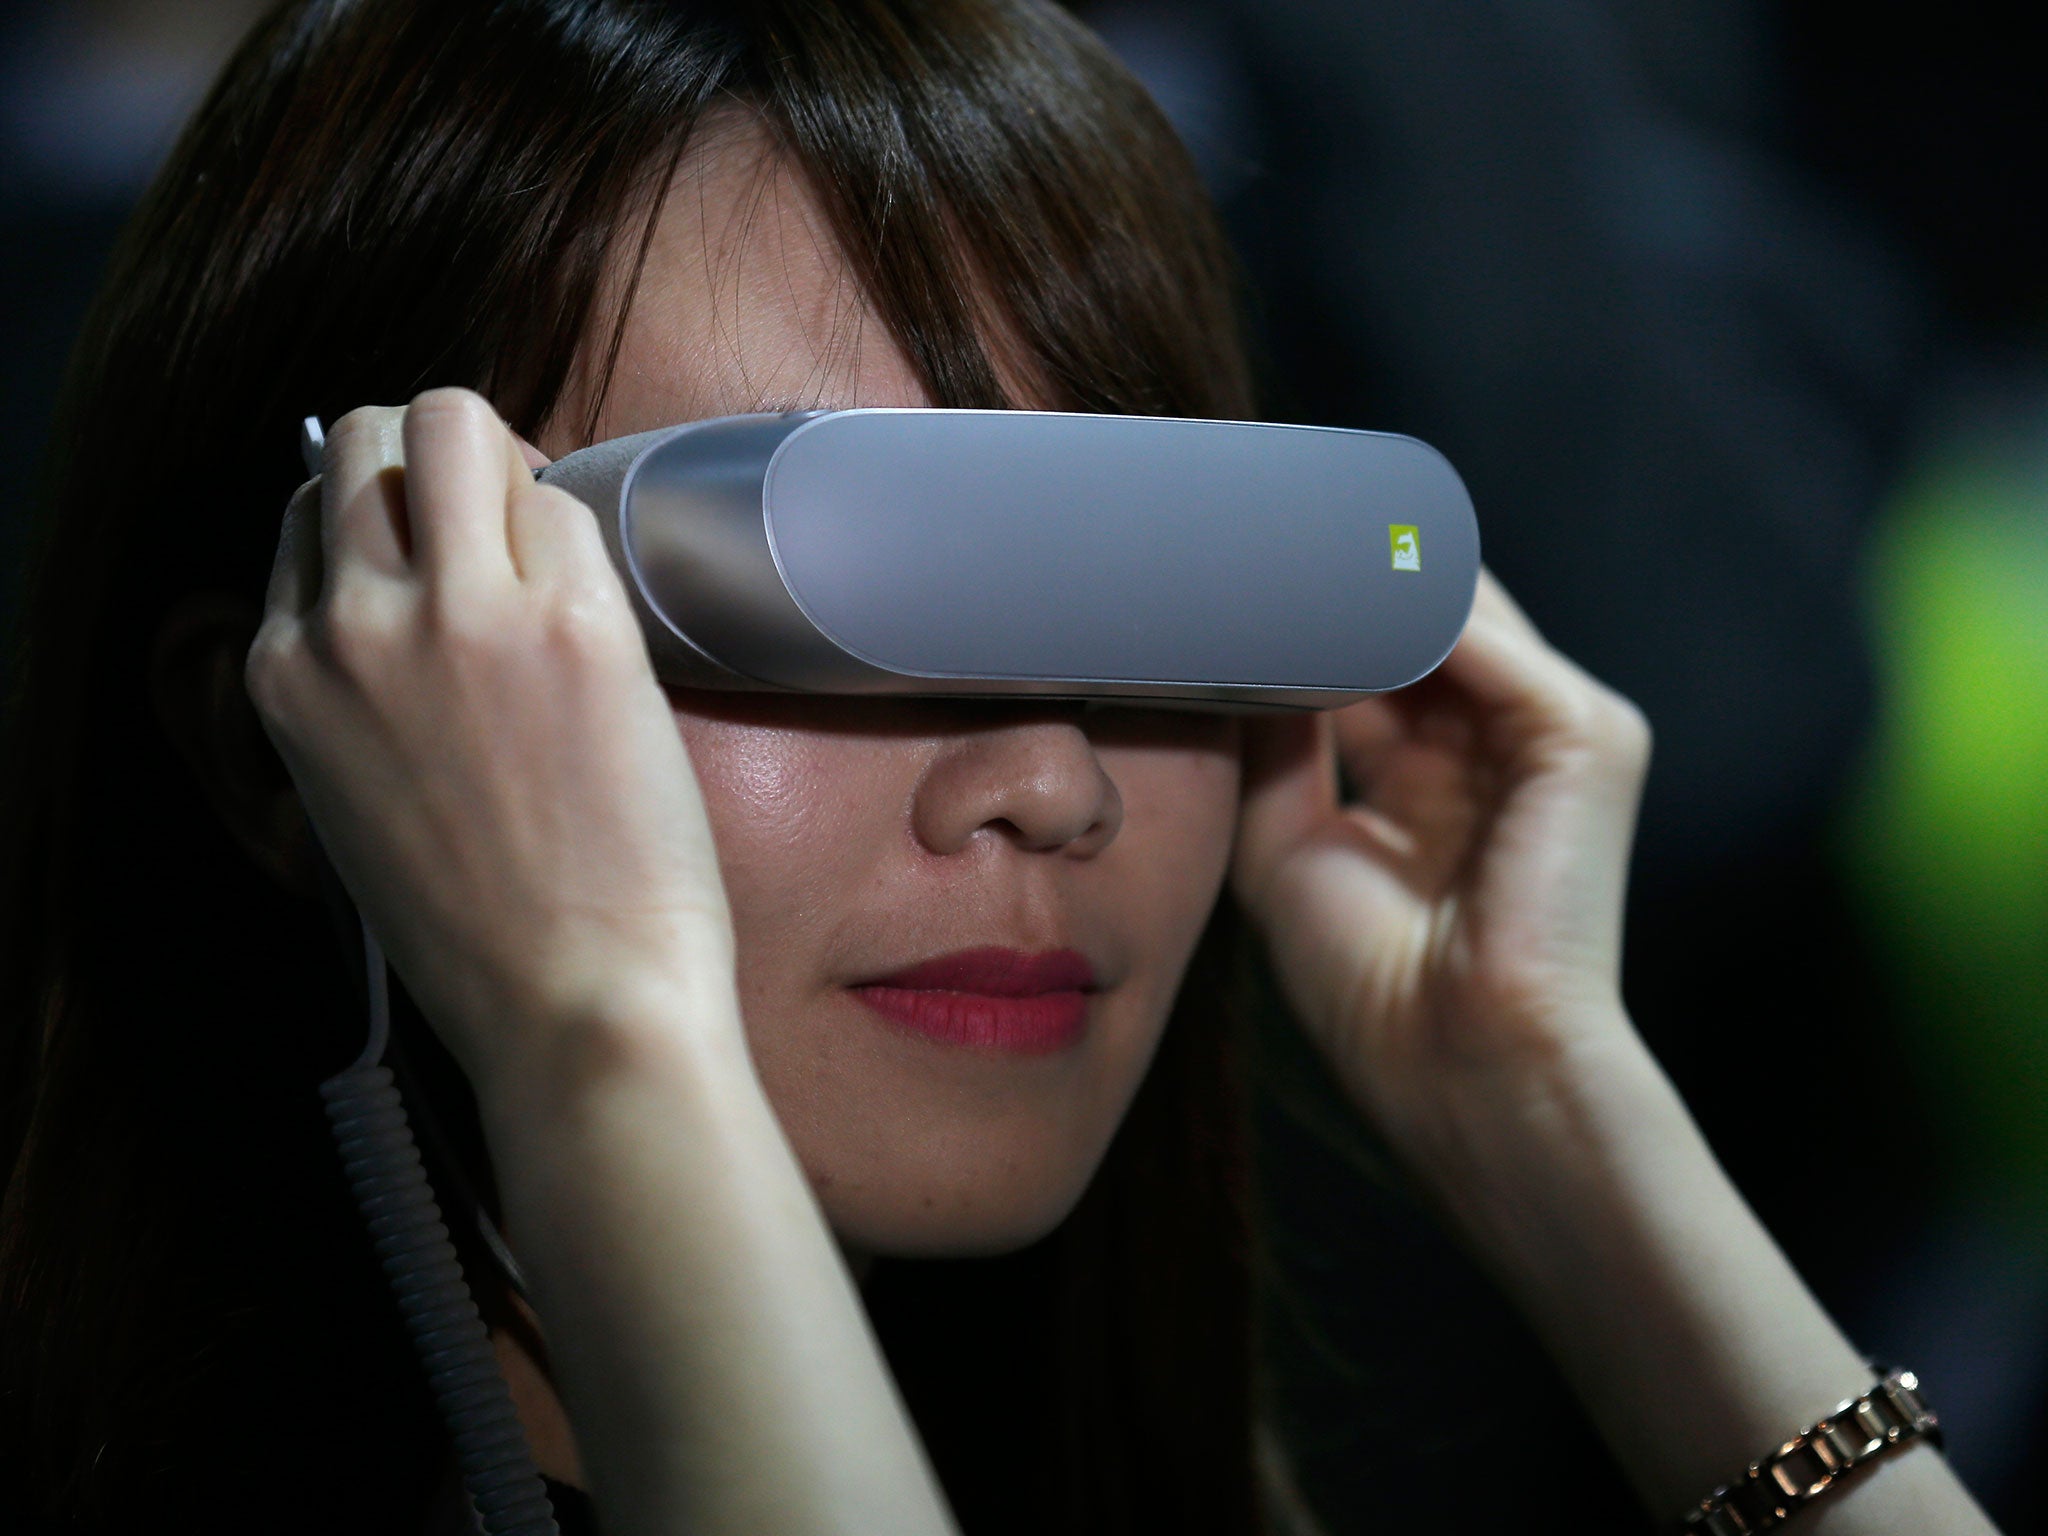 A woman experiments with LG 360 VR glasses at the World Mobile Congress. VR is set to become a billion-dollar business in 2016